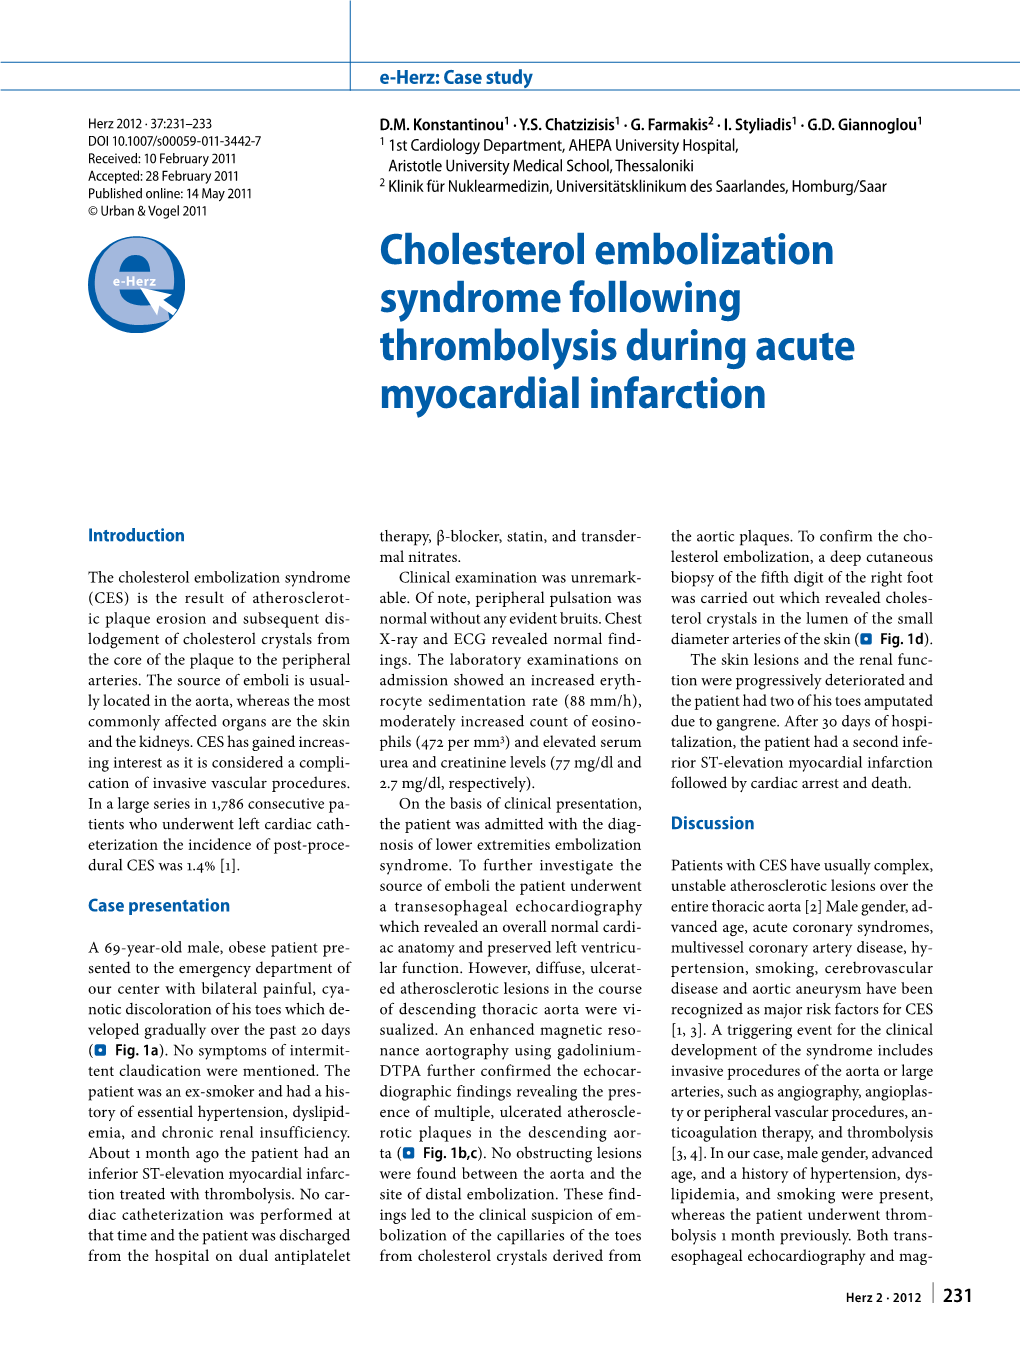 Cholesterol Embolization Syndrome Following Thrombolysis During Acute